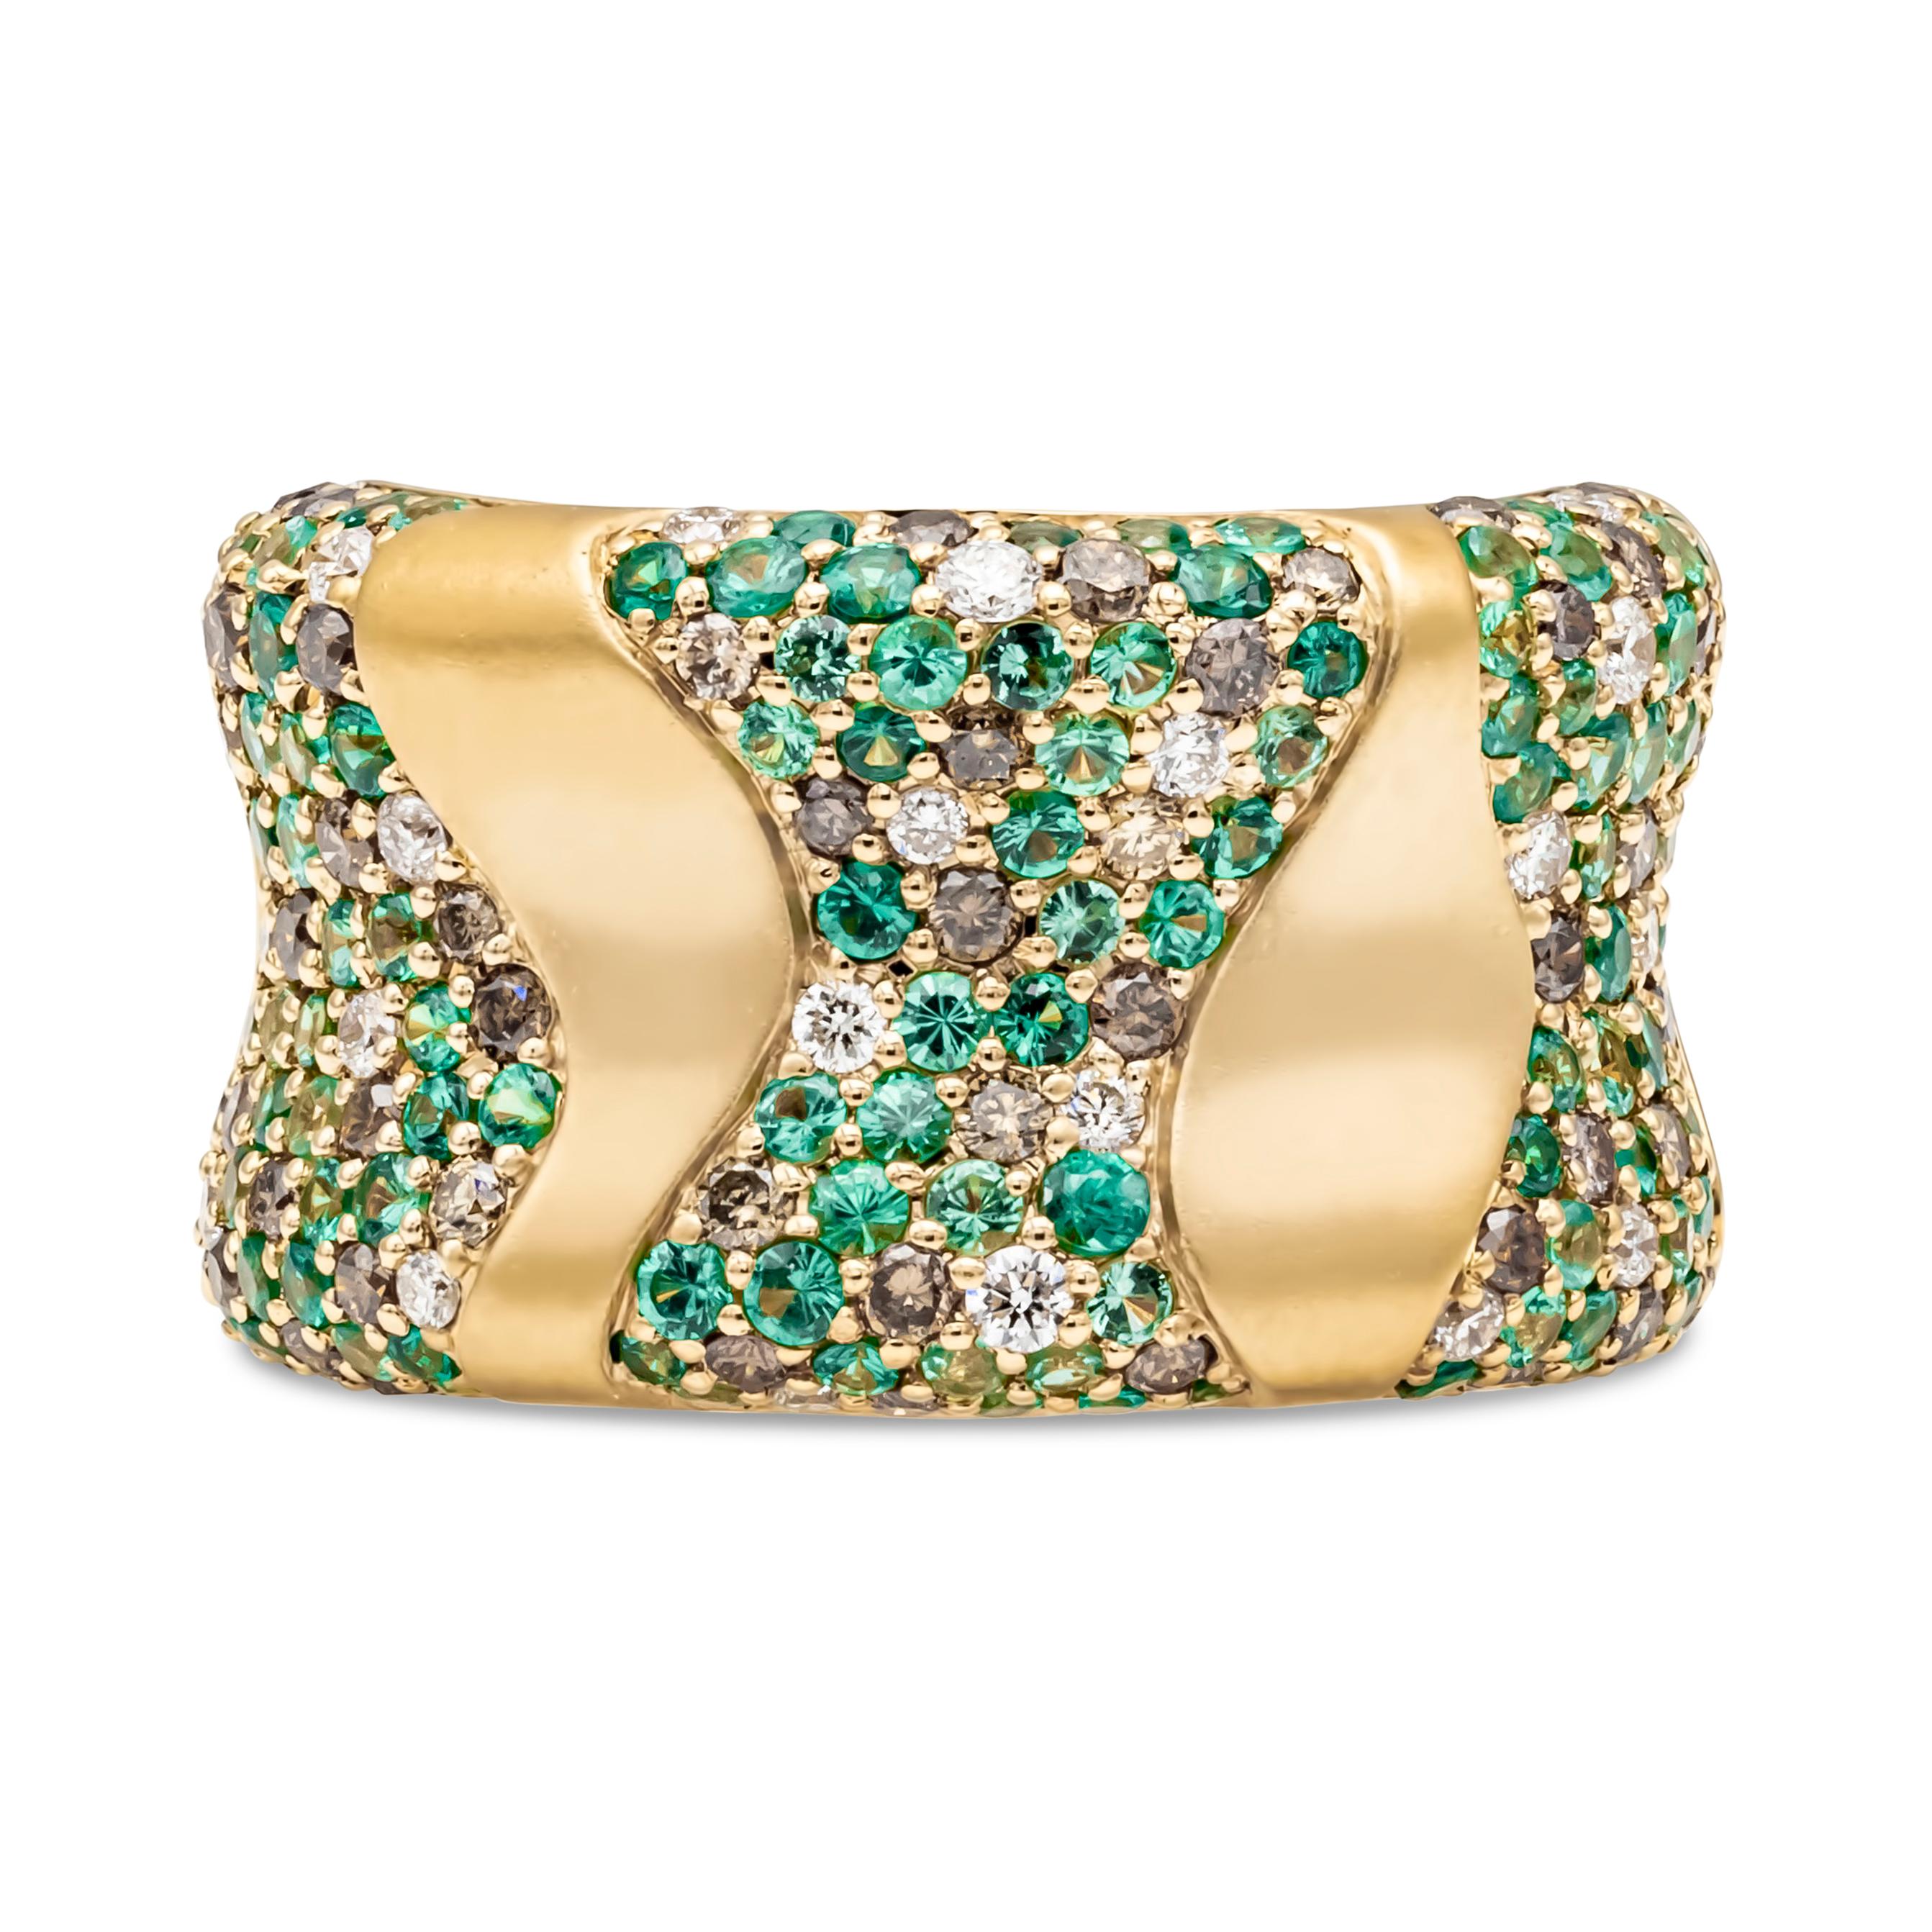 Showcasing an 18k yellow gold stylish and exquisite fashion ring accented with 1.61 carats total of round cut green tsavorite garnet, 0.66 carats total of round cut brown diamonds, VS-SI in clarity and 0.31 carats total of round white diamonds, H